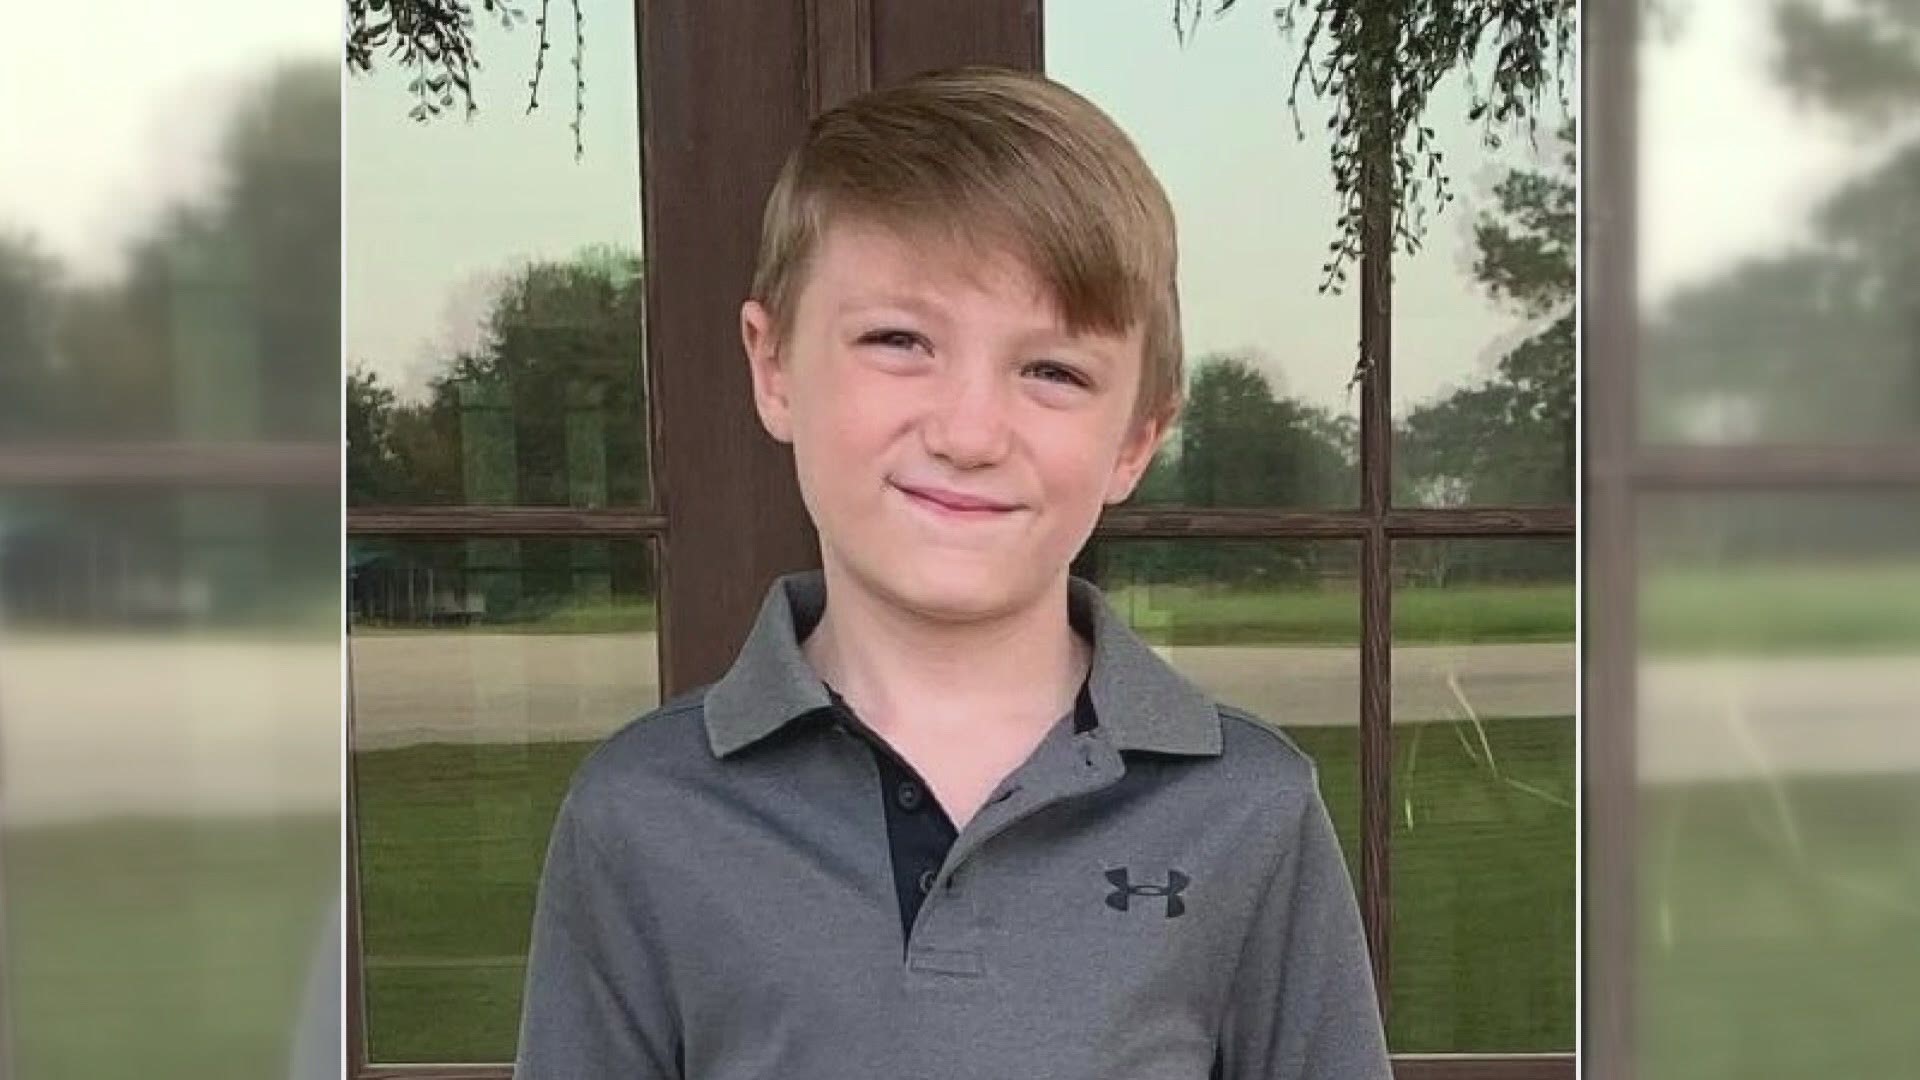 7-year-old Lawson Haas was recently diagnosed with Leukemia and since then his family, friends and neighbors have been his biggest supporters.